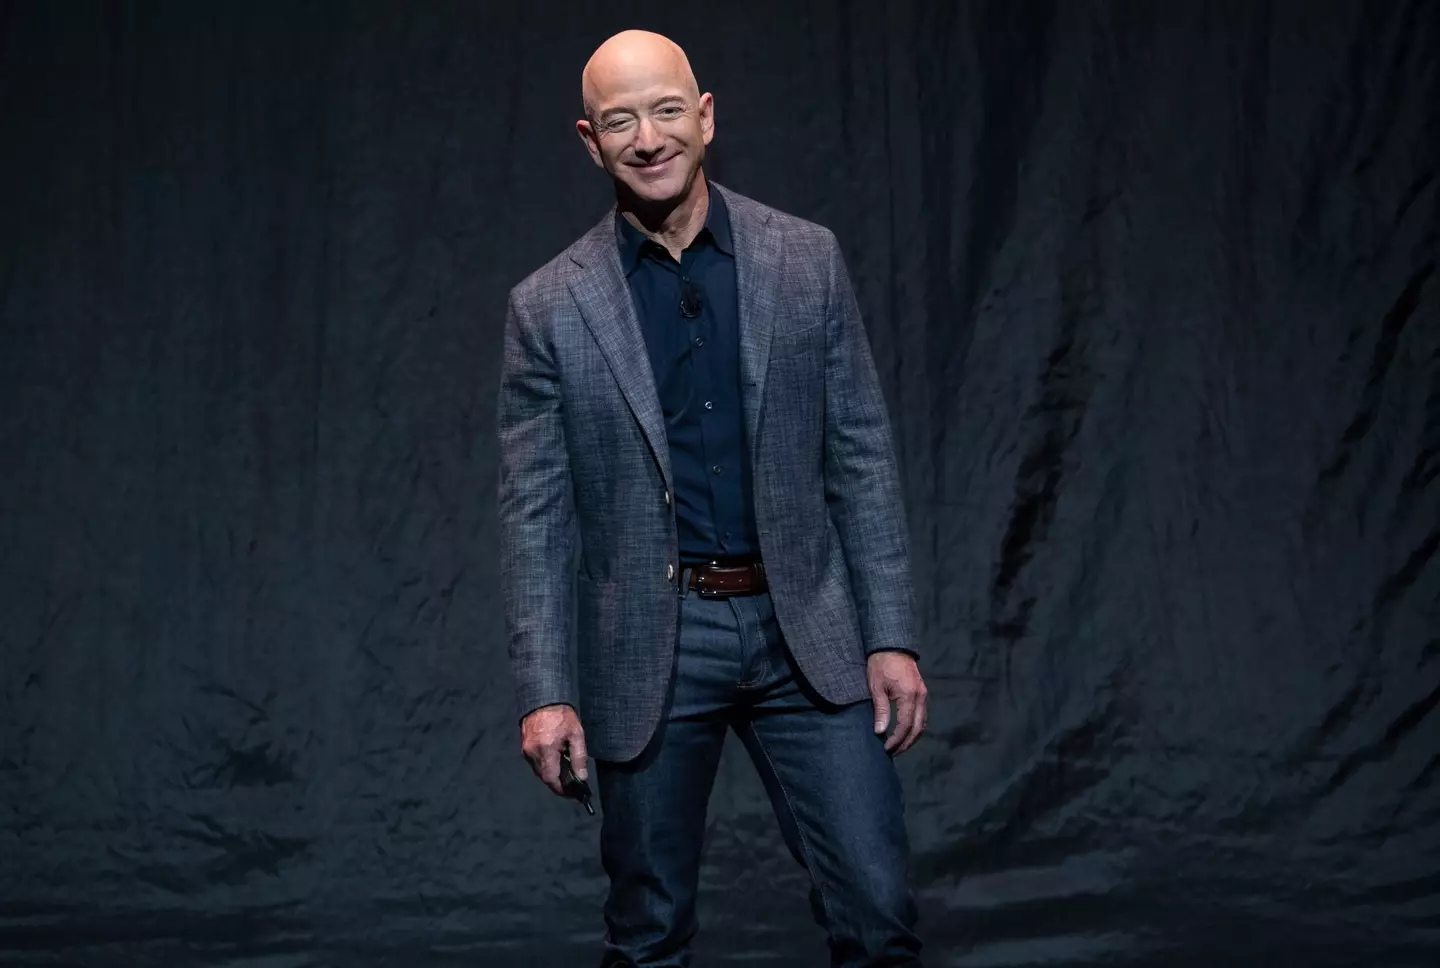 Three questions reportedly help Bezos decide whether to hire someone.